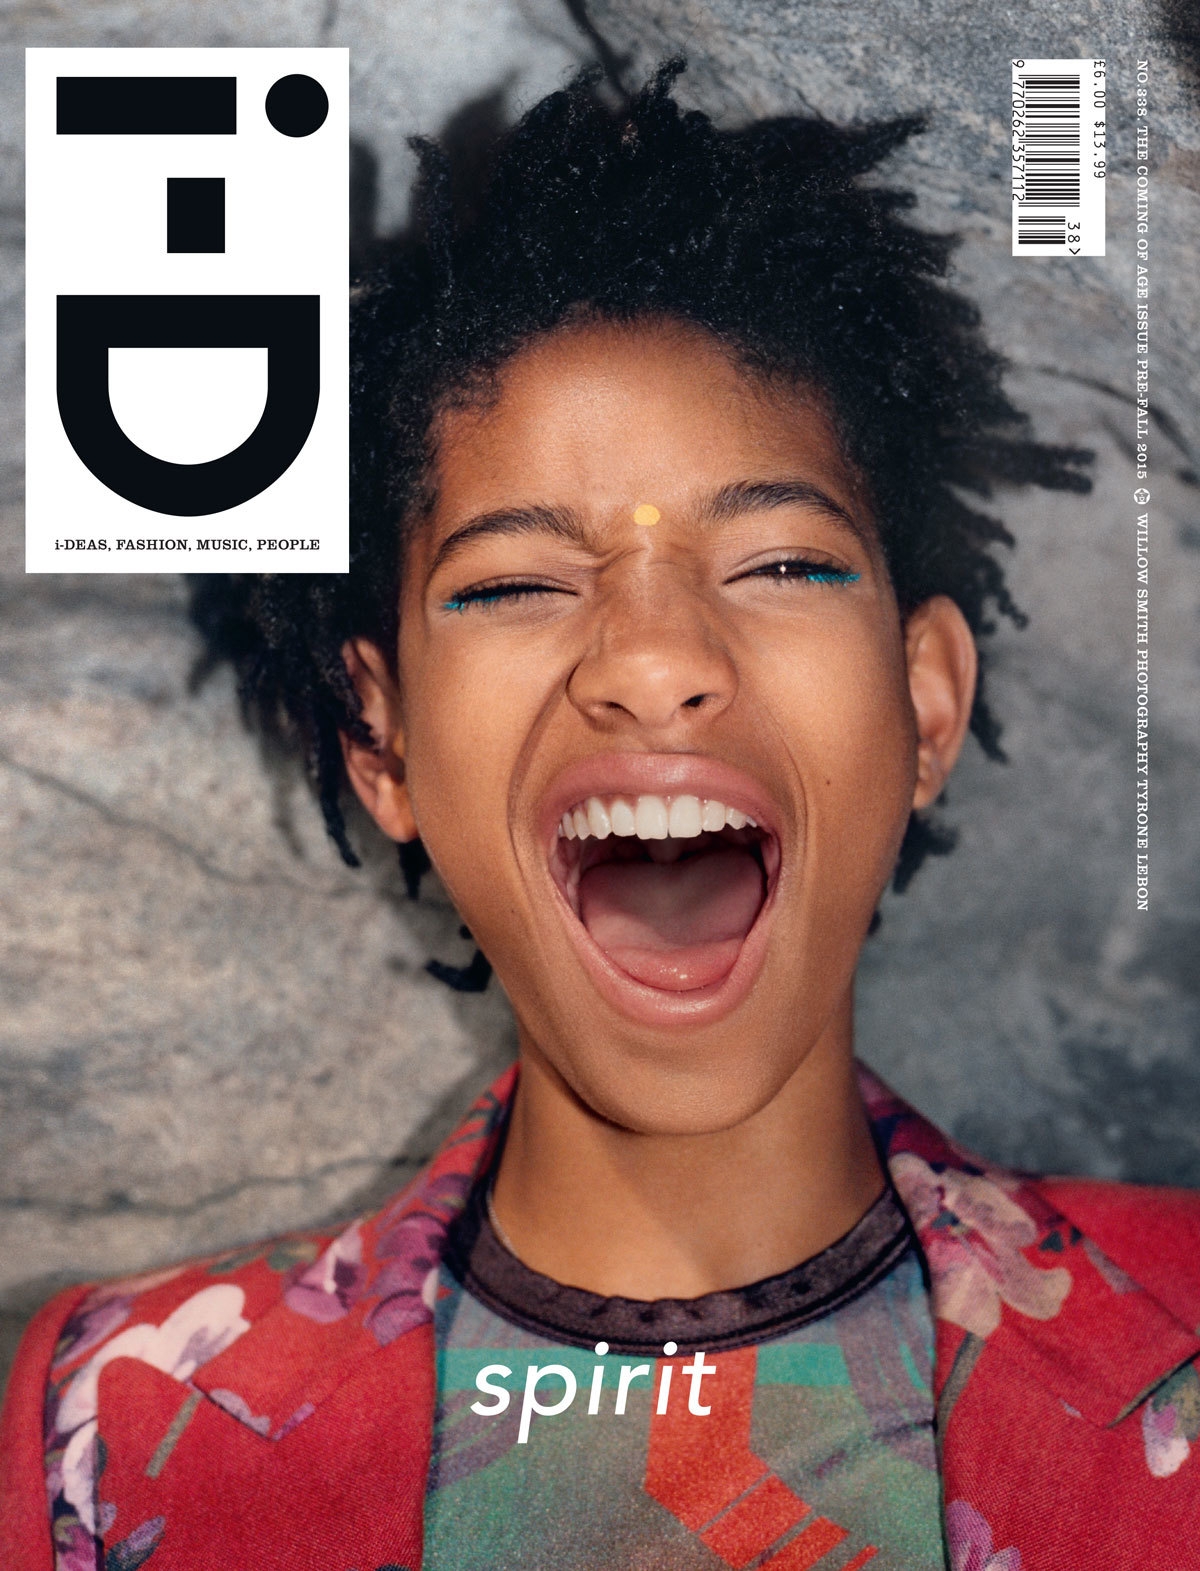 Willow Smith covers May 2016 issue of Teen Vogue